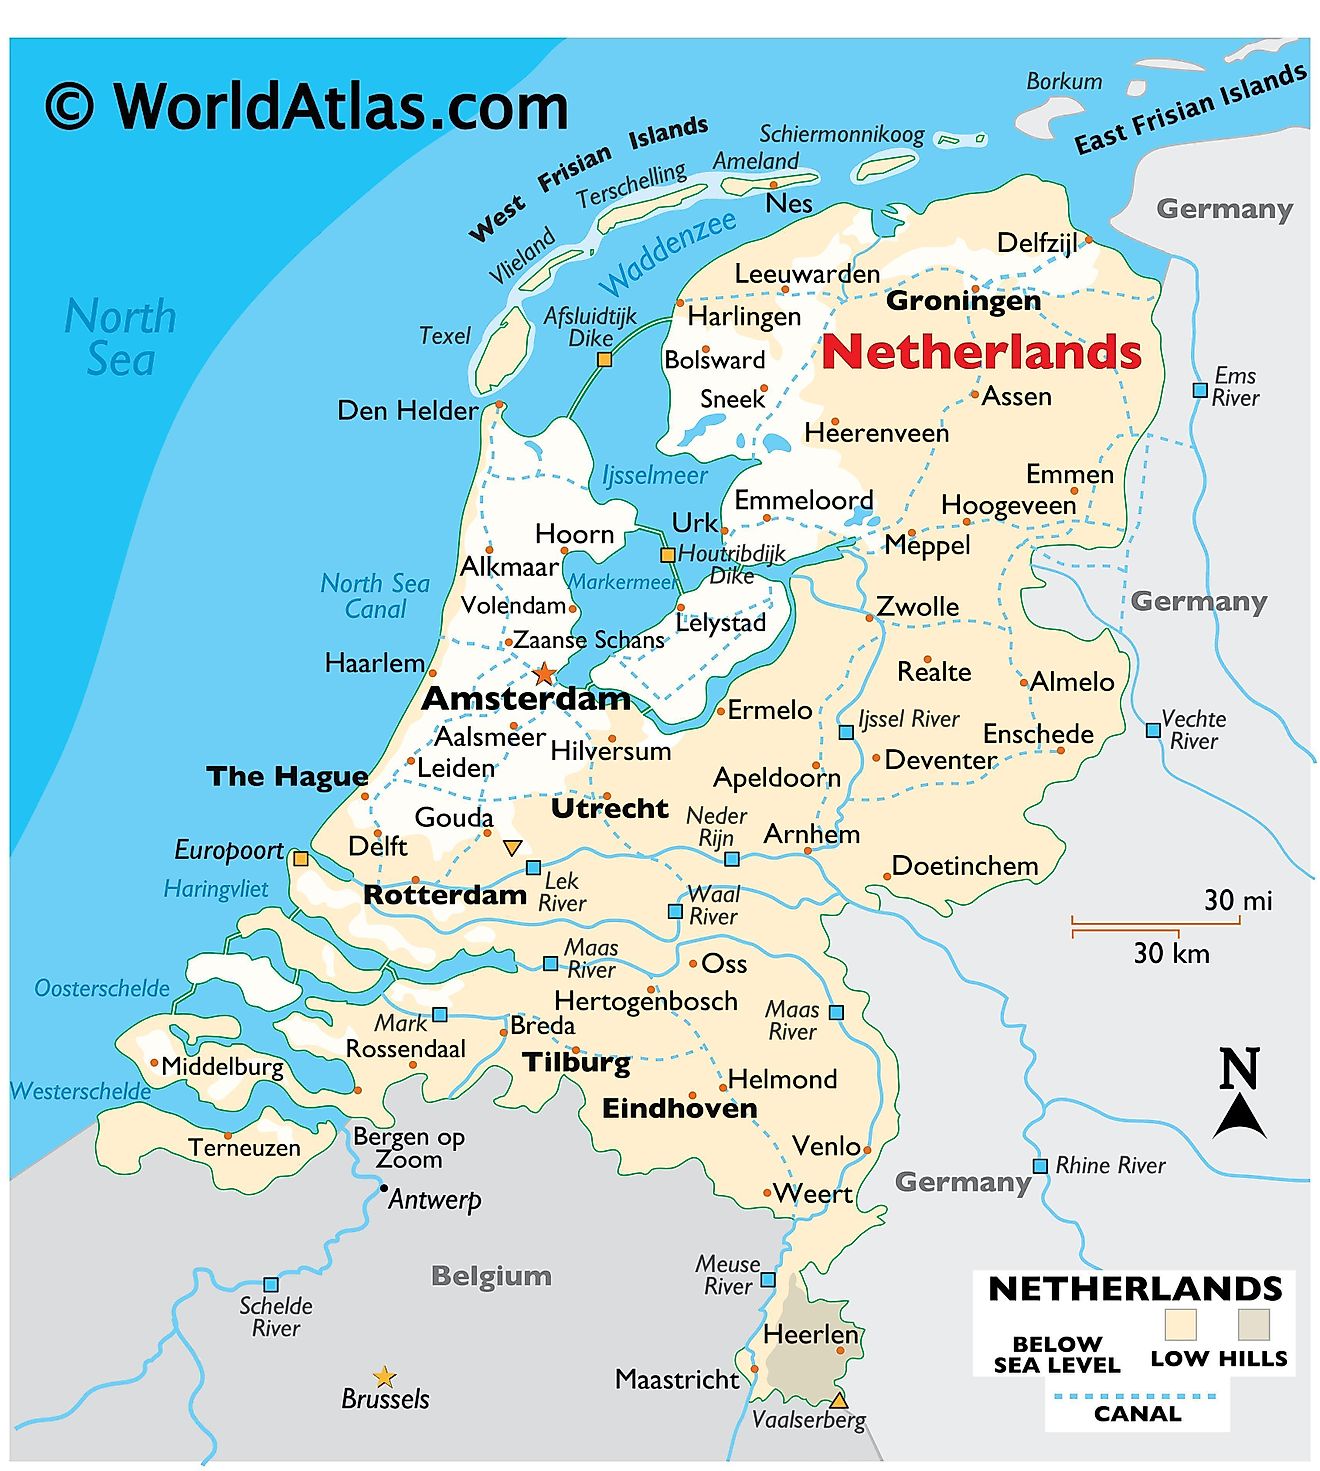 Physical Map of the Netherlands showing relief, international boundaries, major rivers,  extreme points, important cities, islands, etc.